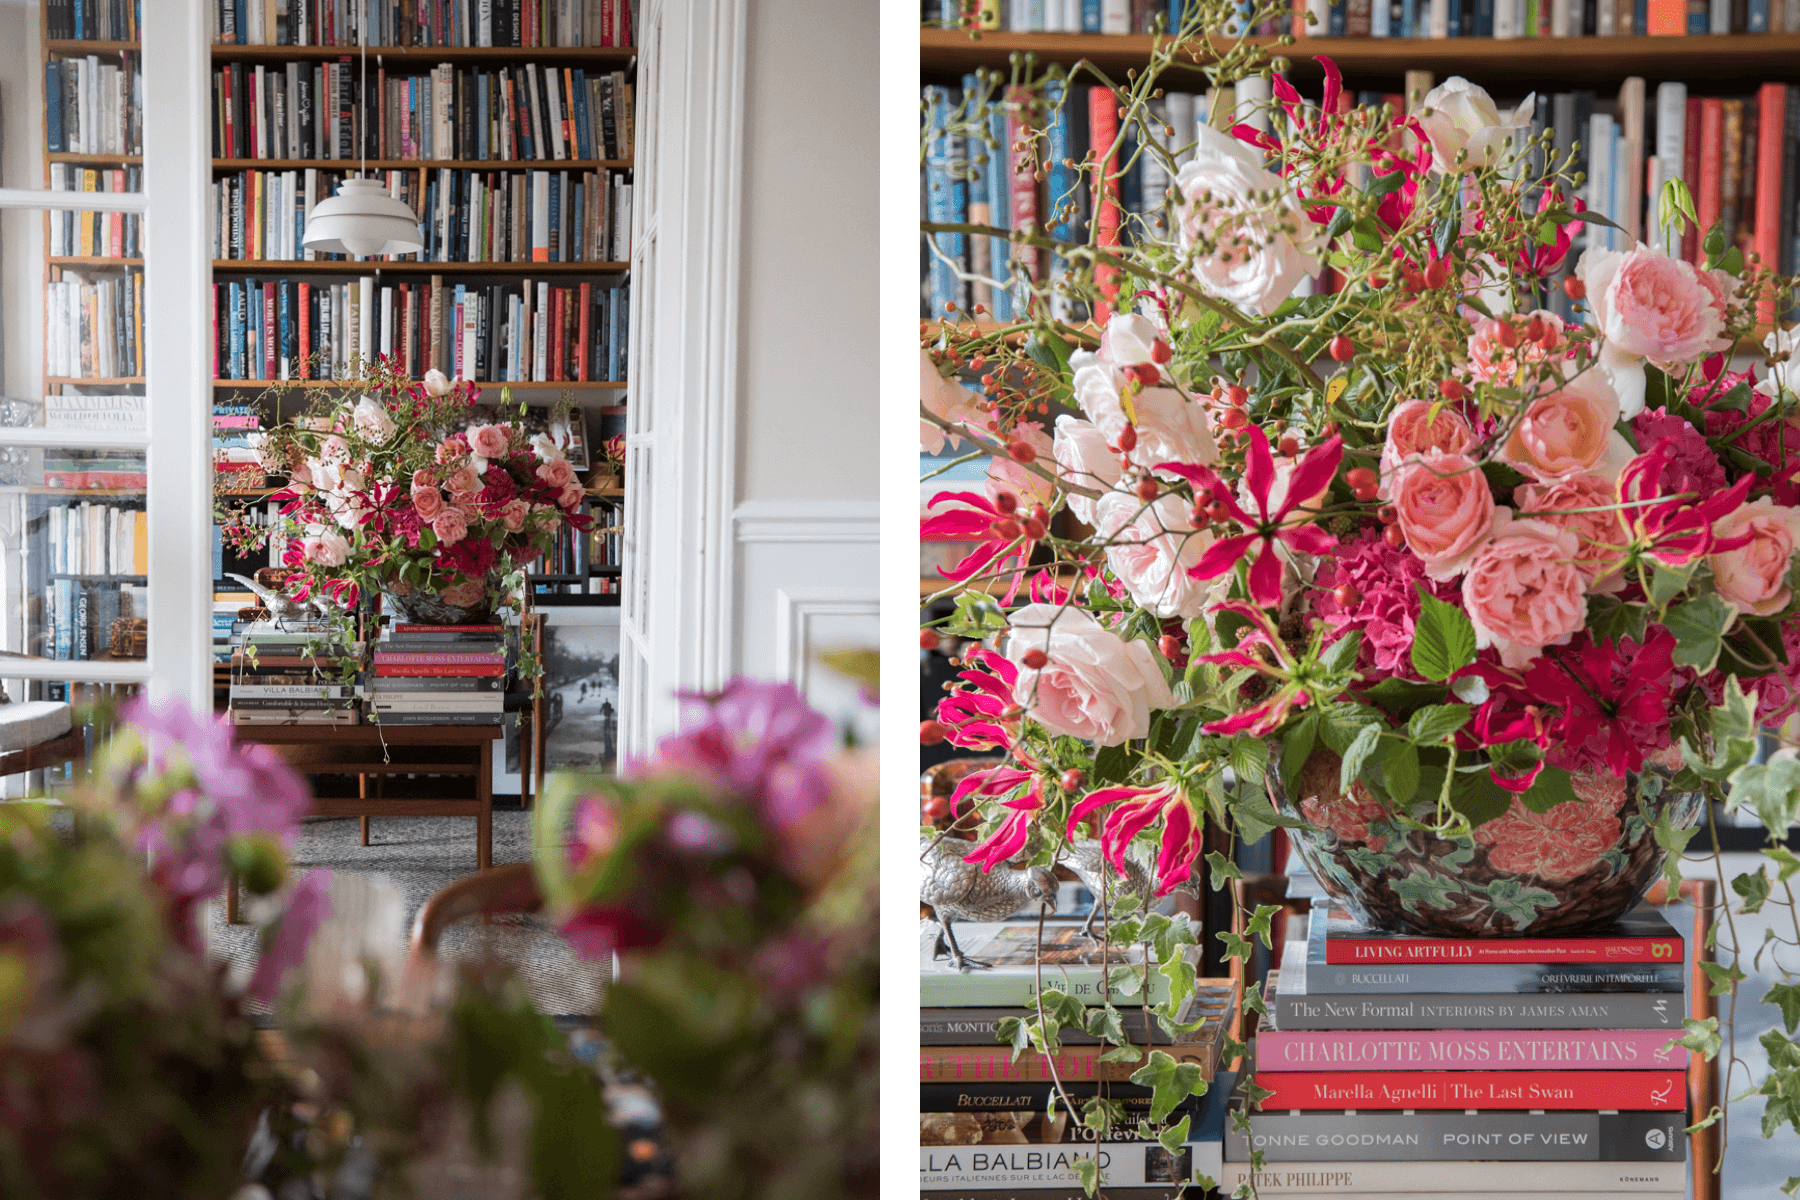 Left: View of a pink floral arrangement in the library of a Parisian apartment. Right: Close-up view of the same pink floral arrangement sitting on top of a stack of books in the library of a Parisian apartment. 